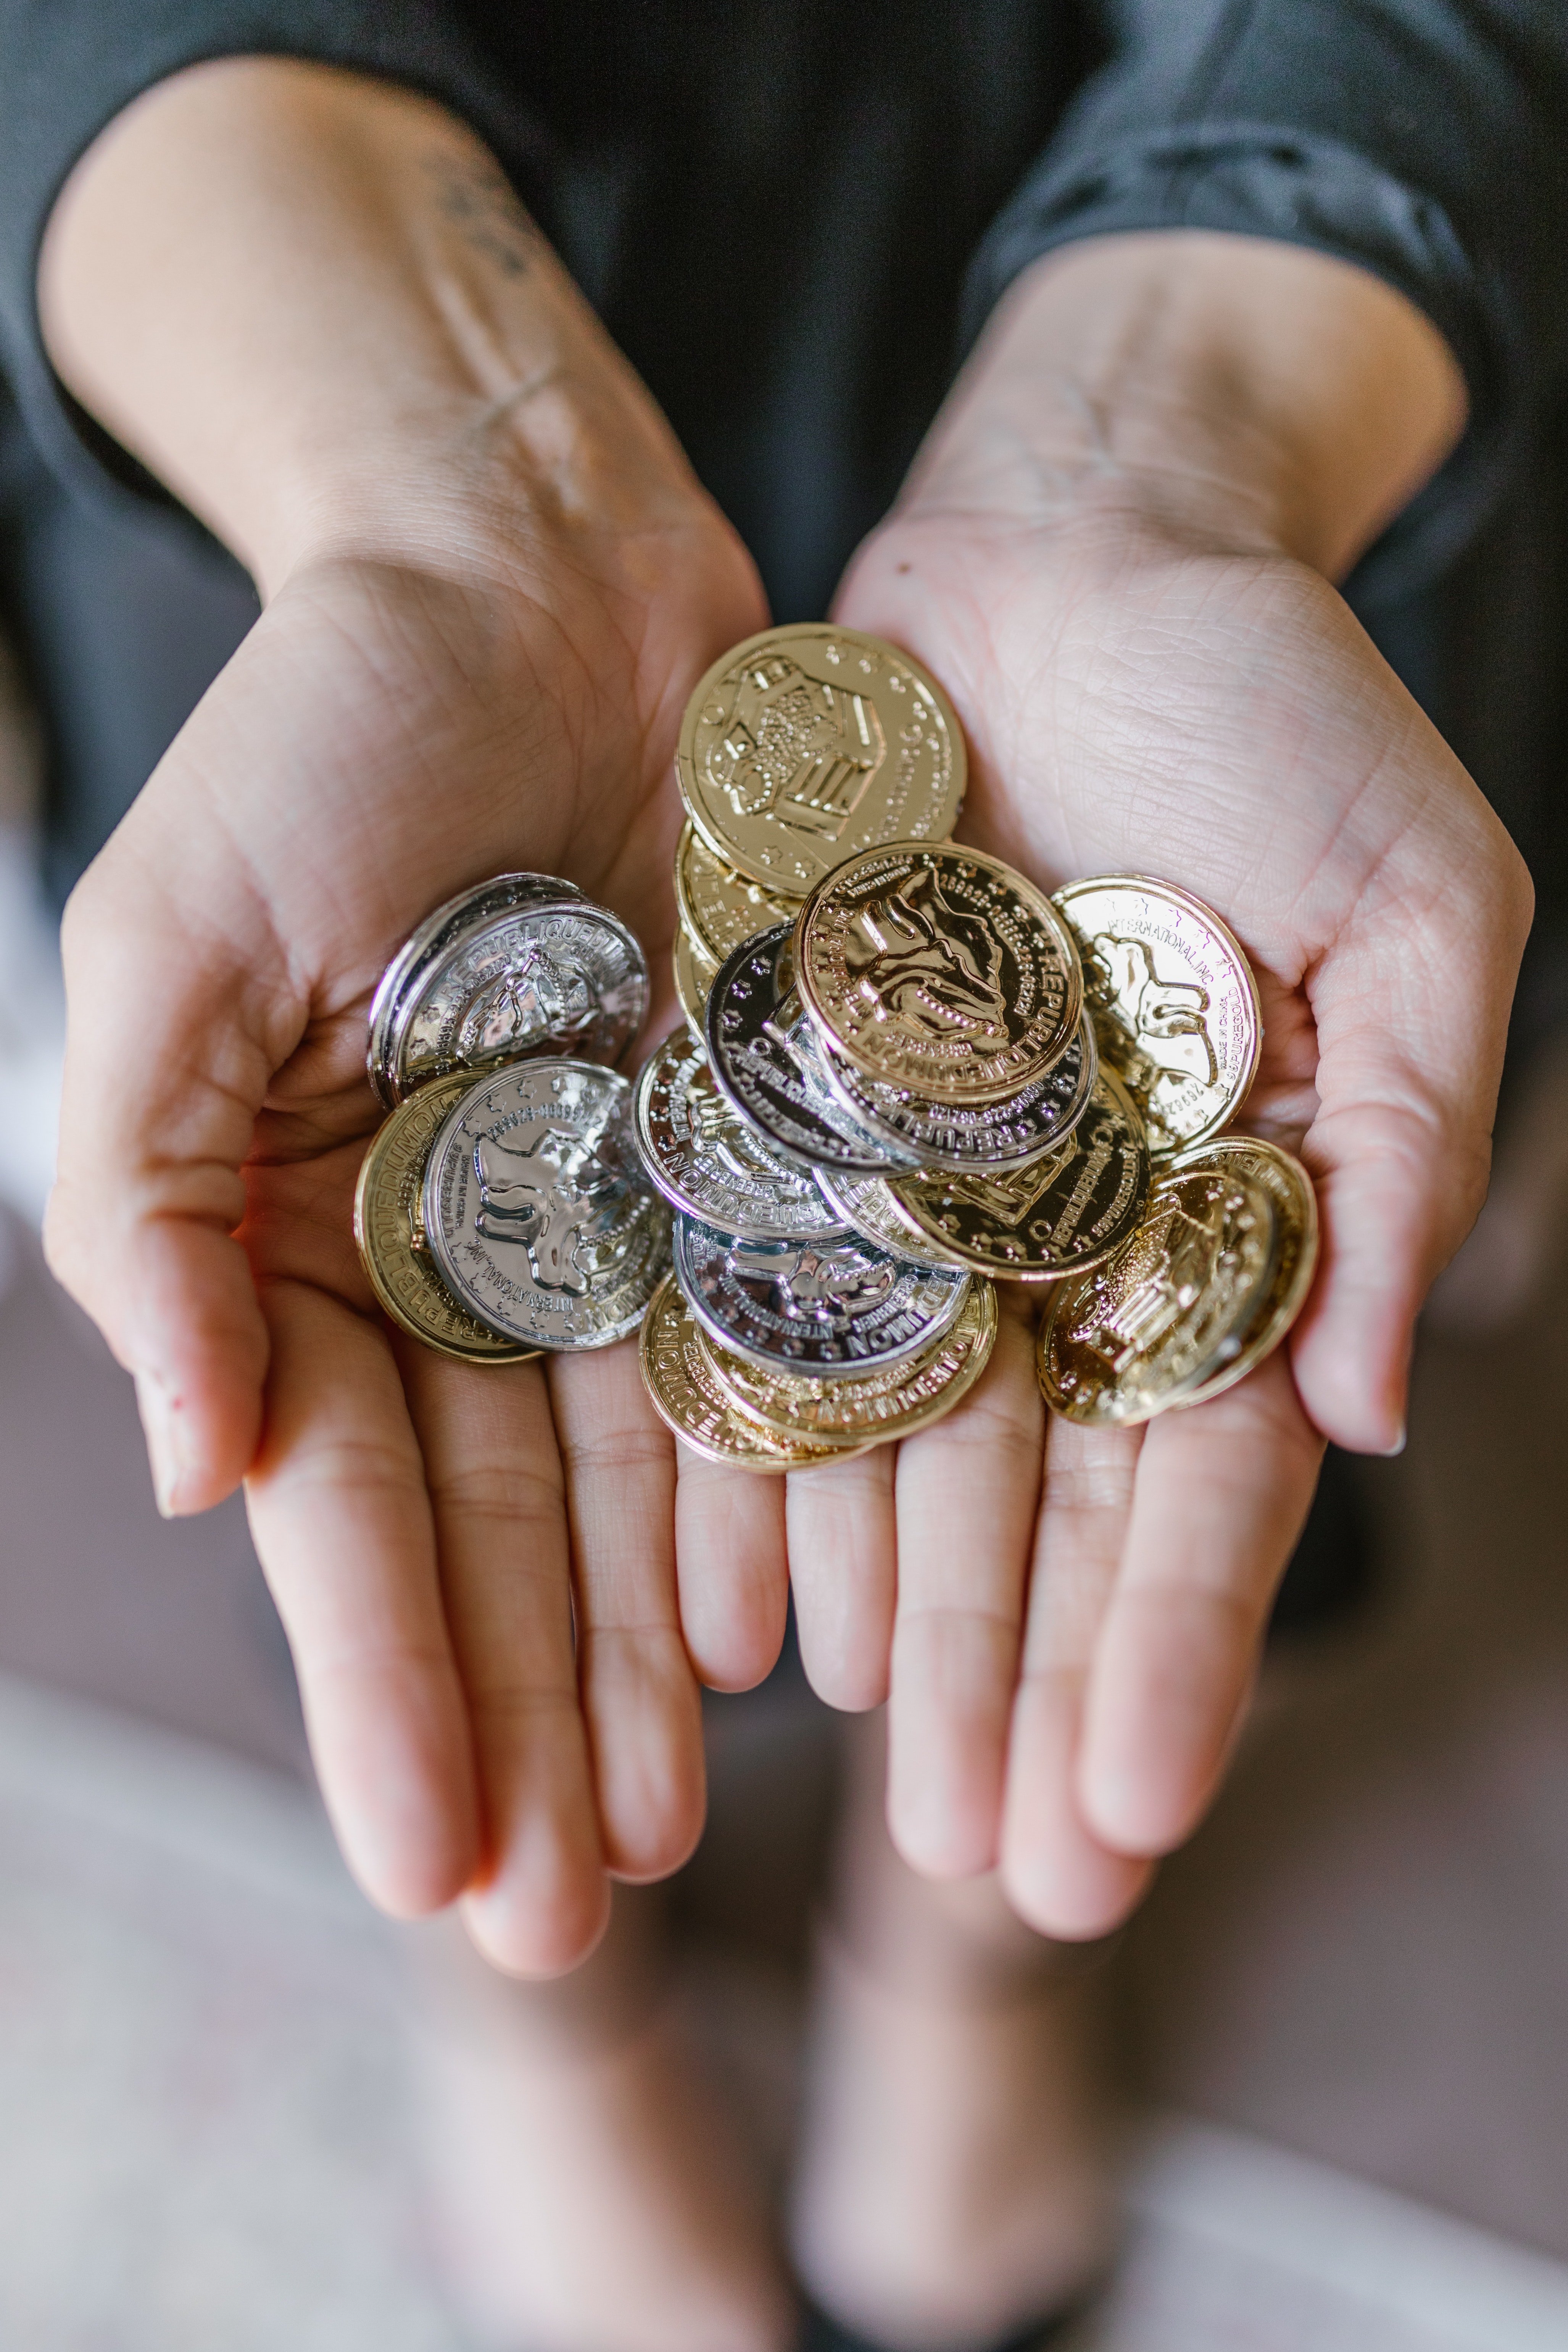 A person holding coins. | Source: Pexels